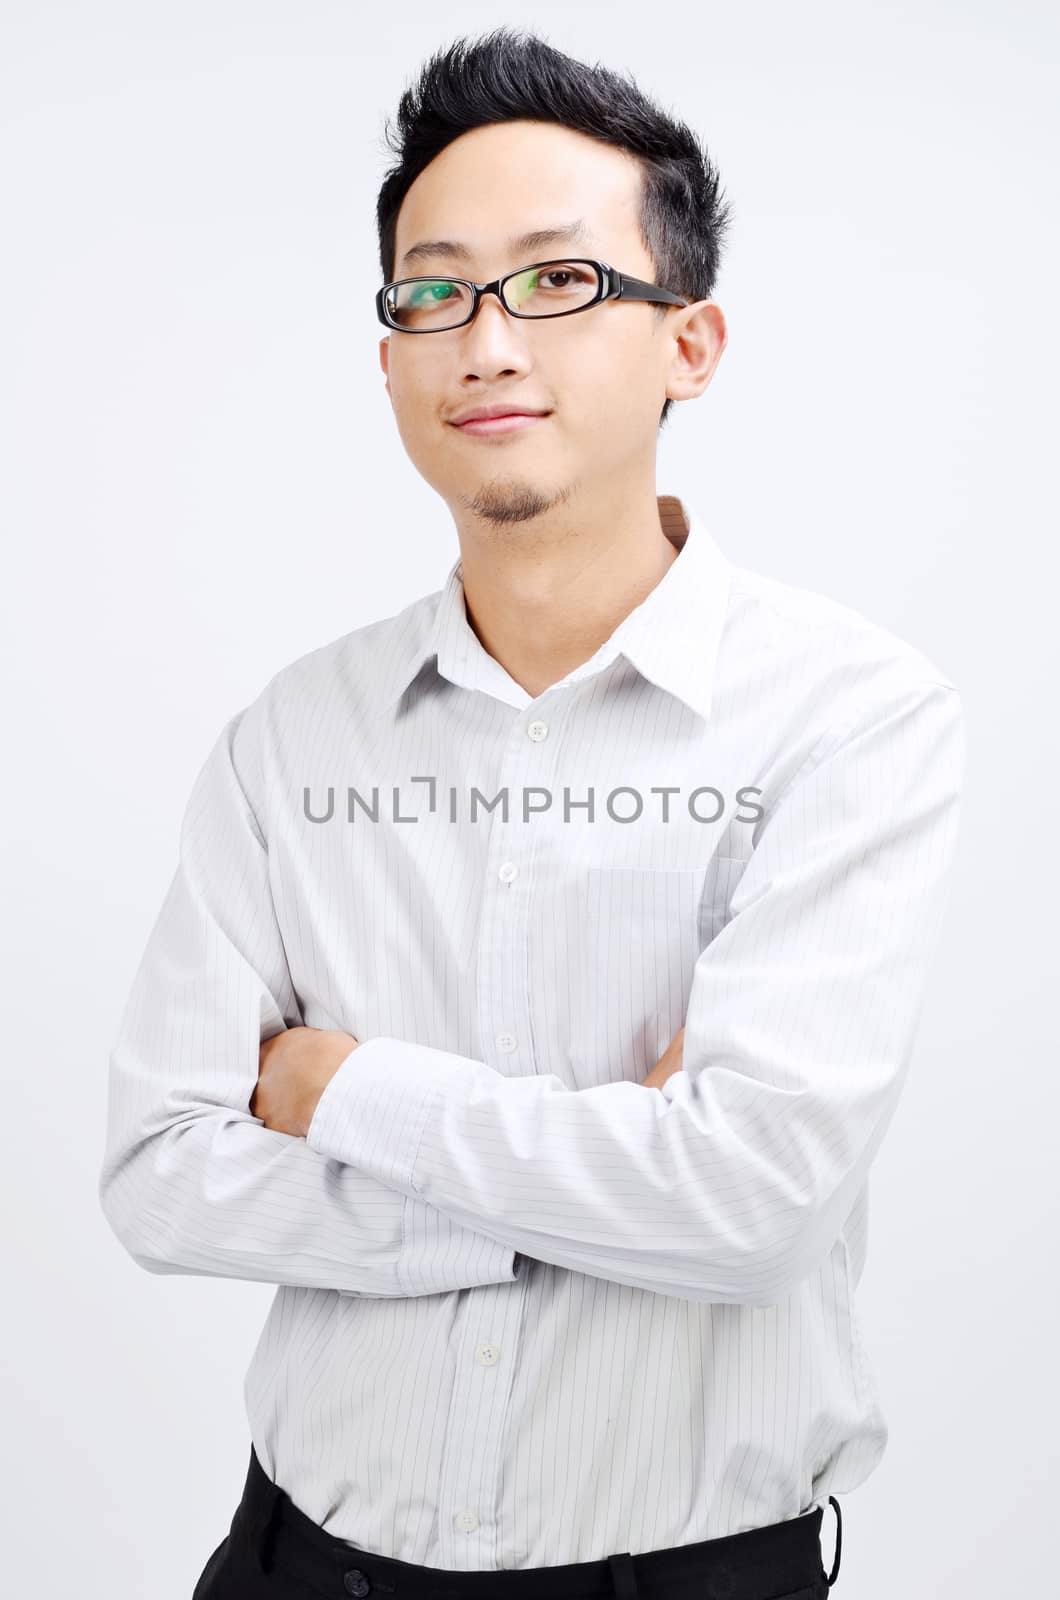 Portrait of Asian business man arms crossed and smiling, standing isolated on plain background.